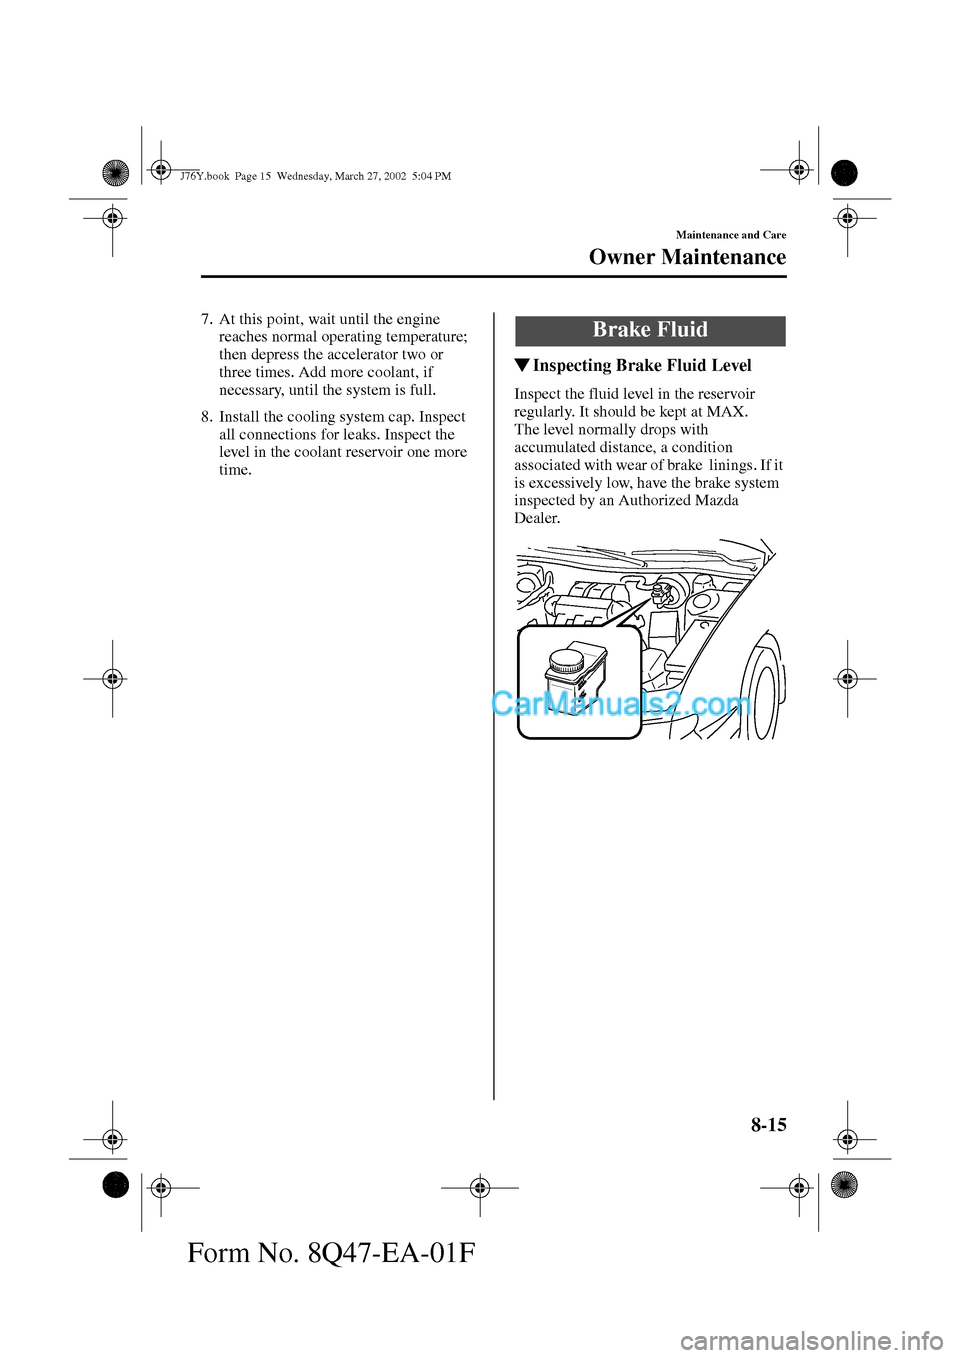 MAZDA MODEL MILLENIA 2002  Owners Manual (in English) 8-15
Maintenance and Care
Owner Maintenance
Form No. 8Q47-EA-01F
7. At this point, wait until the engine 
reaches normal operating temperature; 
then depress the accelerator two or 
three times. Add m